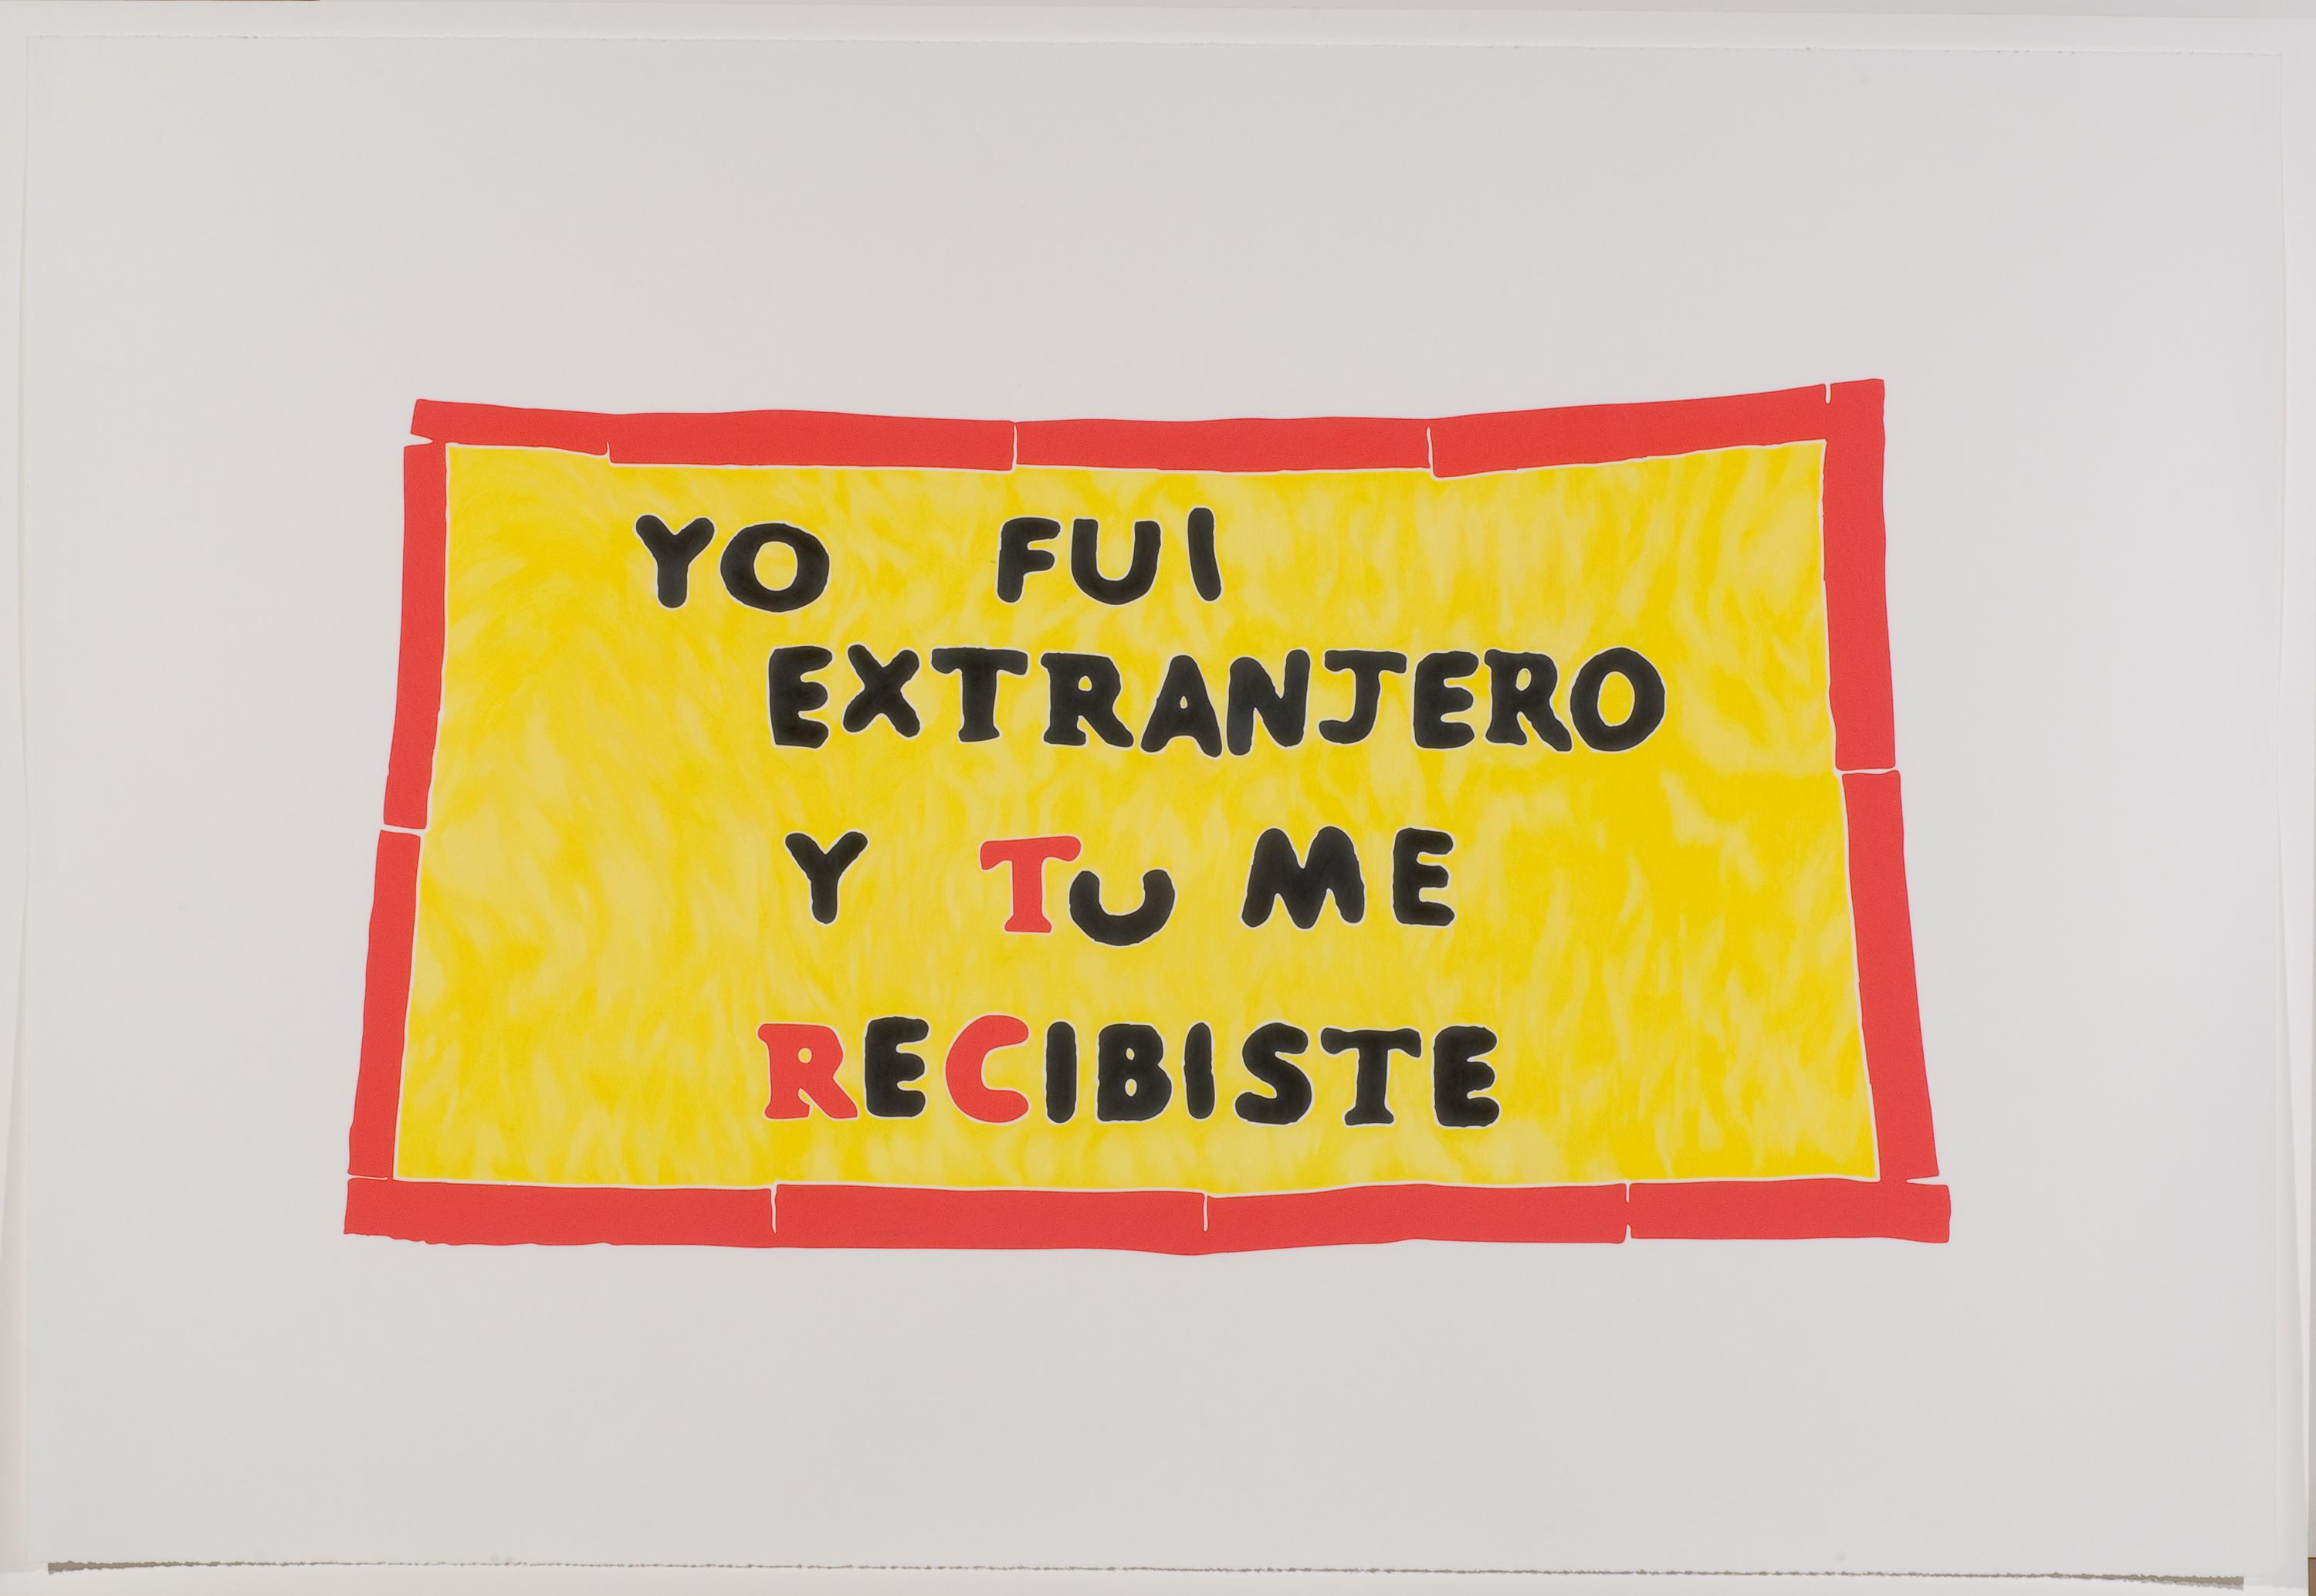 Red and yellow banner with the words "YO FUI EXTRANJERO Y TU ME RECIBISTE"